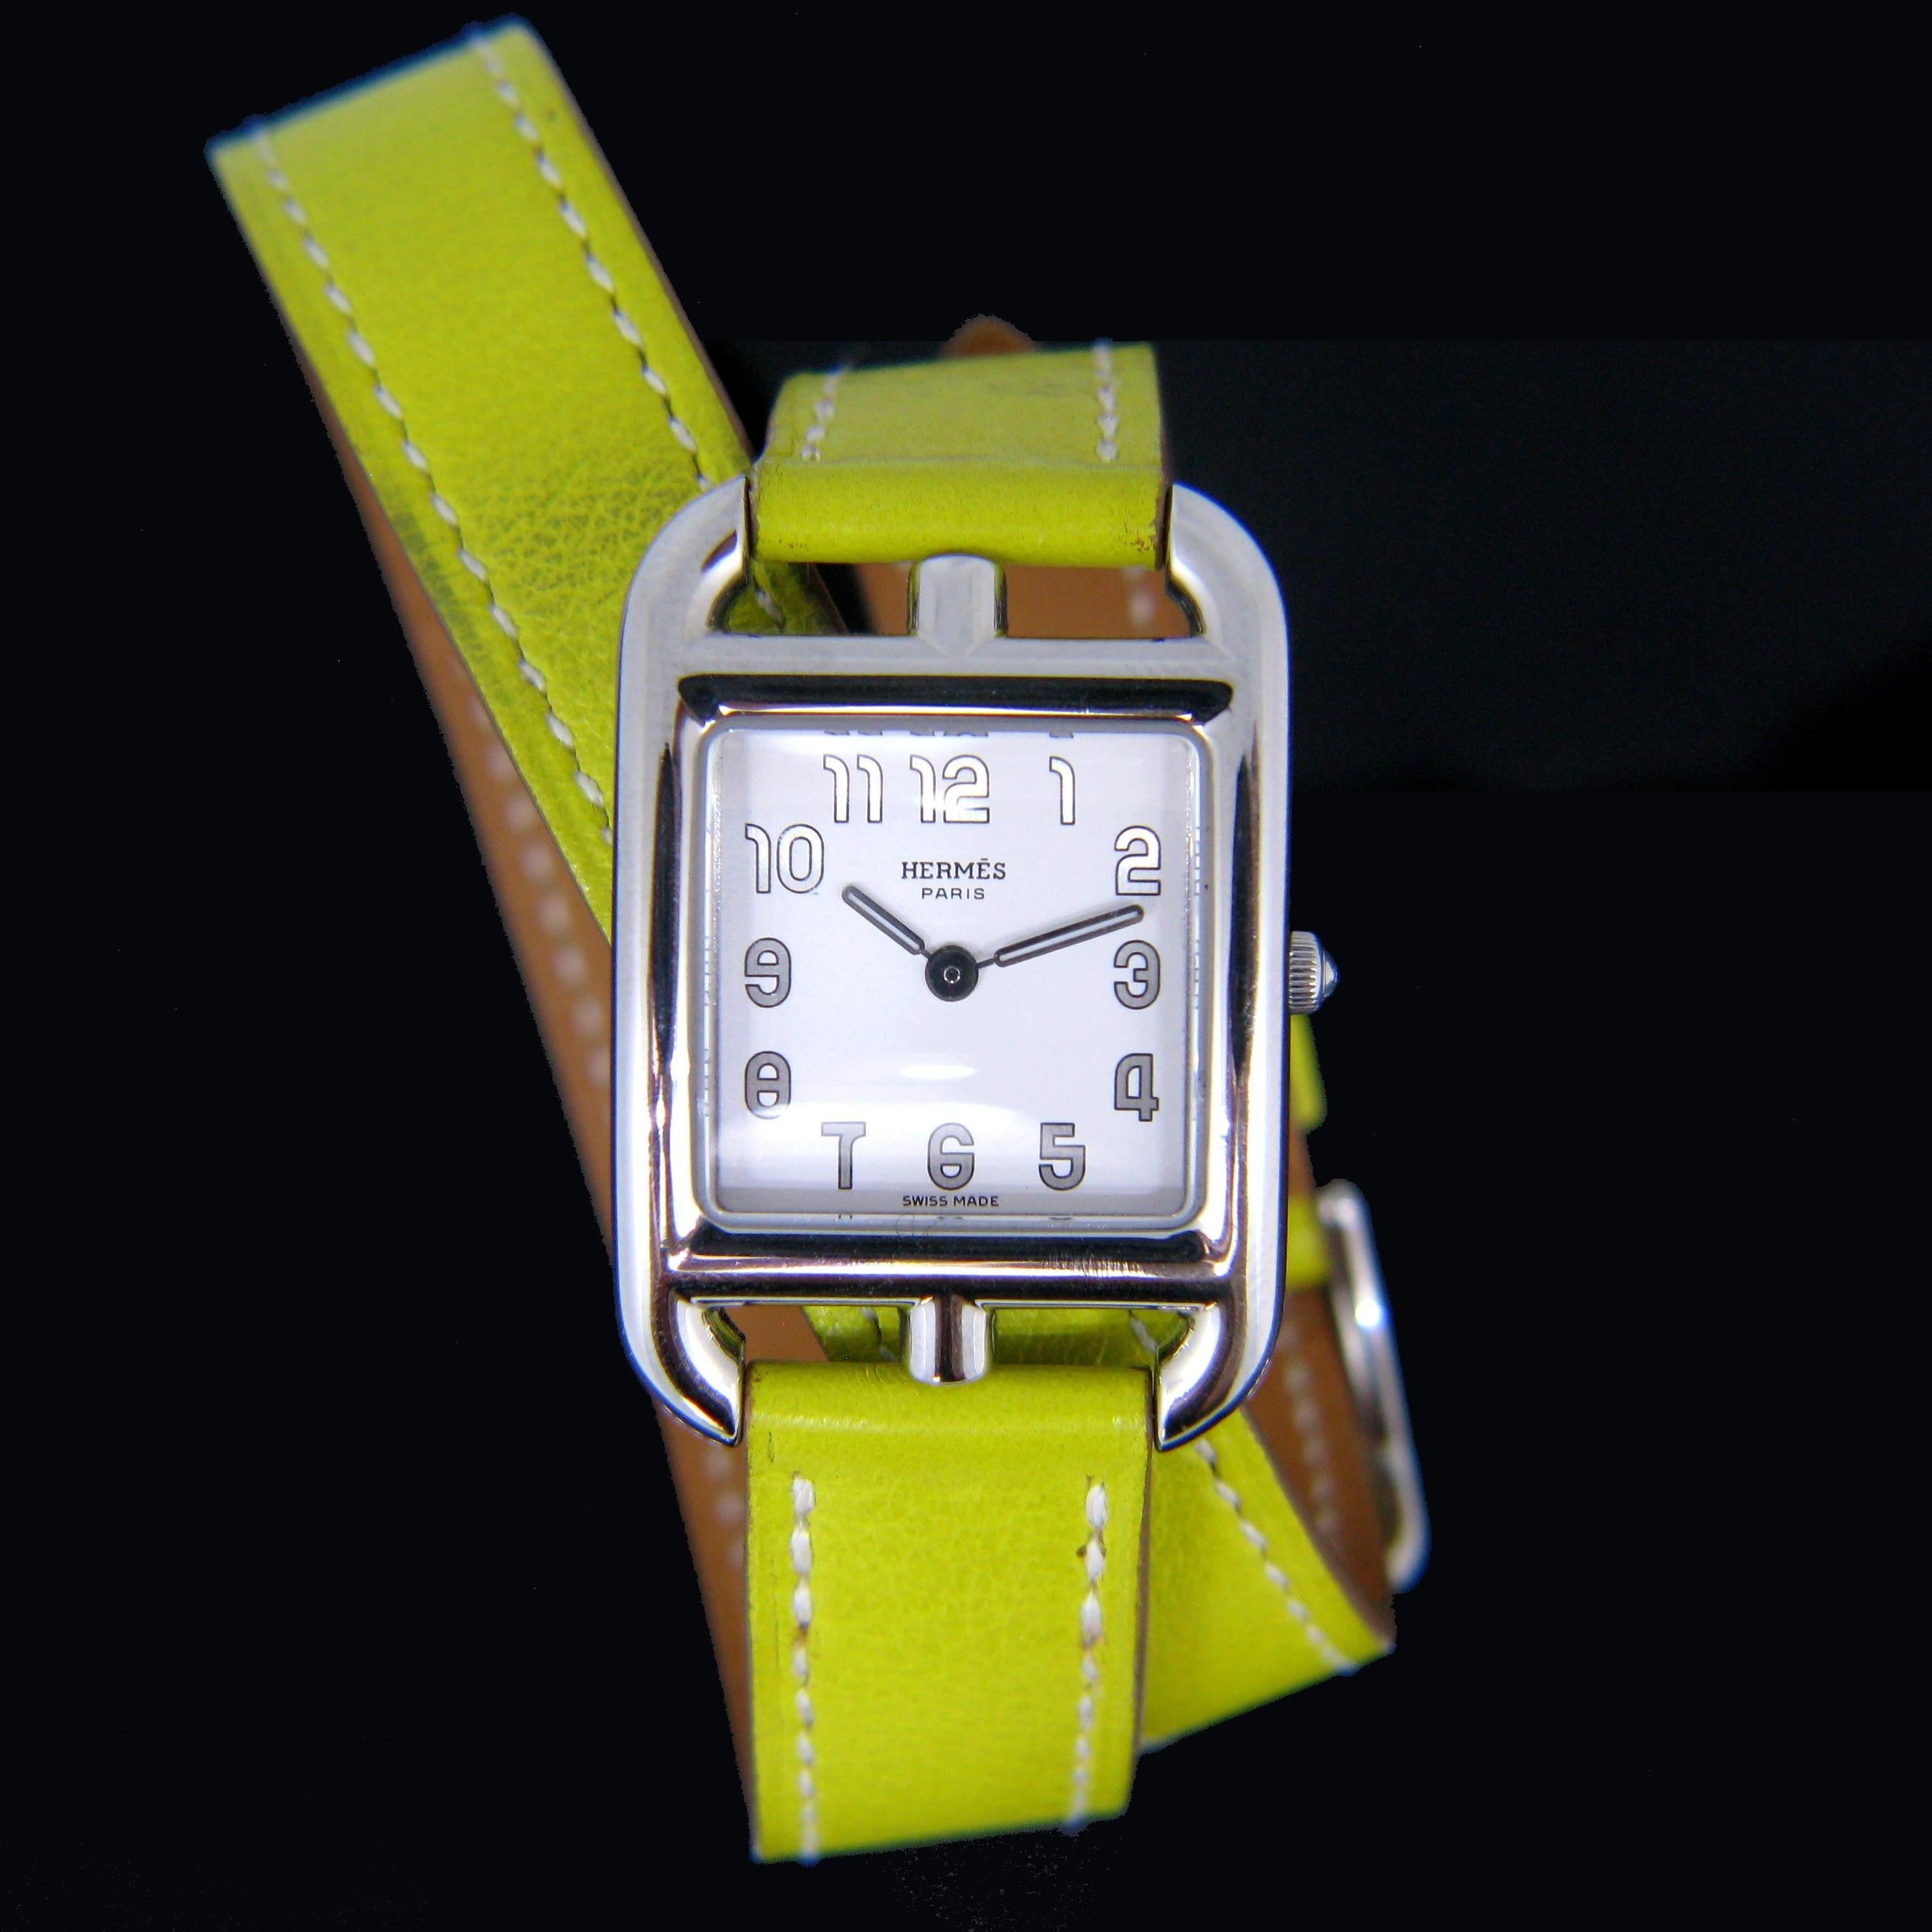 This Hermes watch is from the Cape Cod collection – model reference is CC1.210. The case is square and made in stainless steel. It is numbered 2923274 on the back. The movement is automatic. It is in very good condition. The bracelet is a double